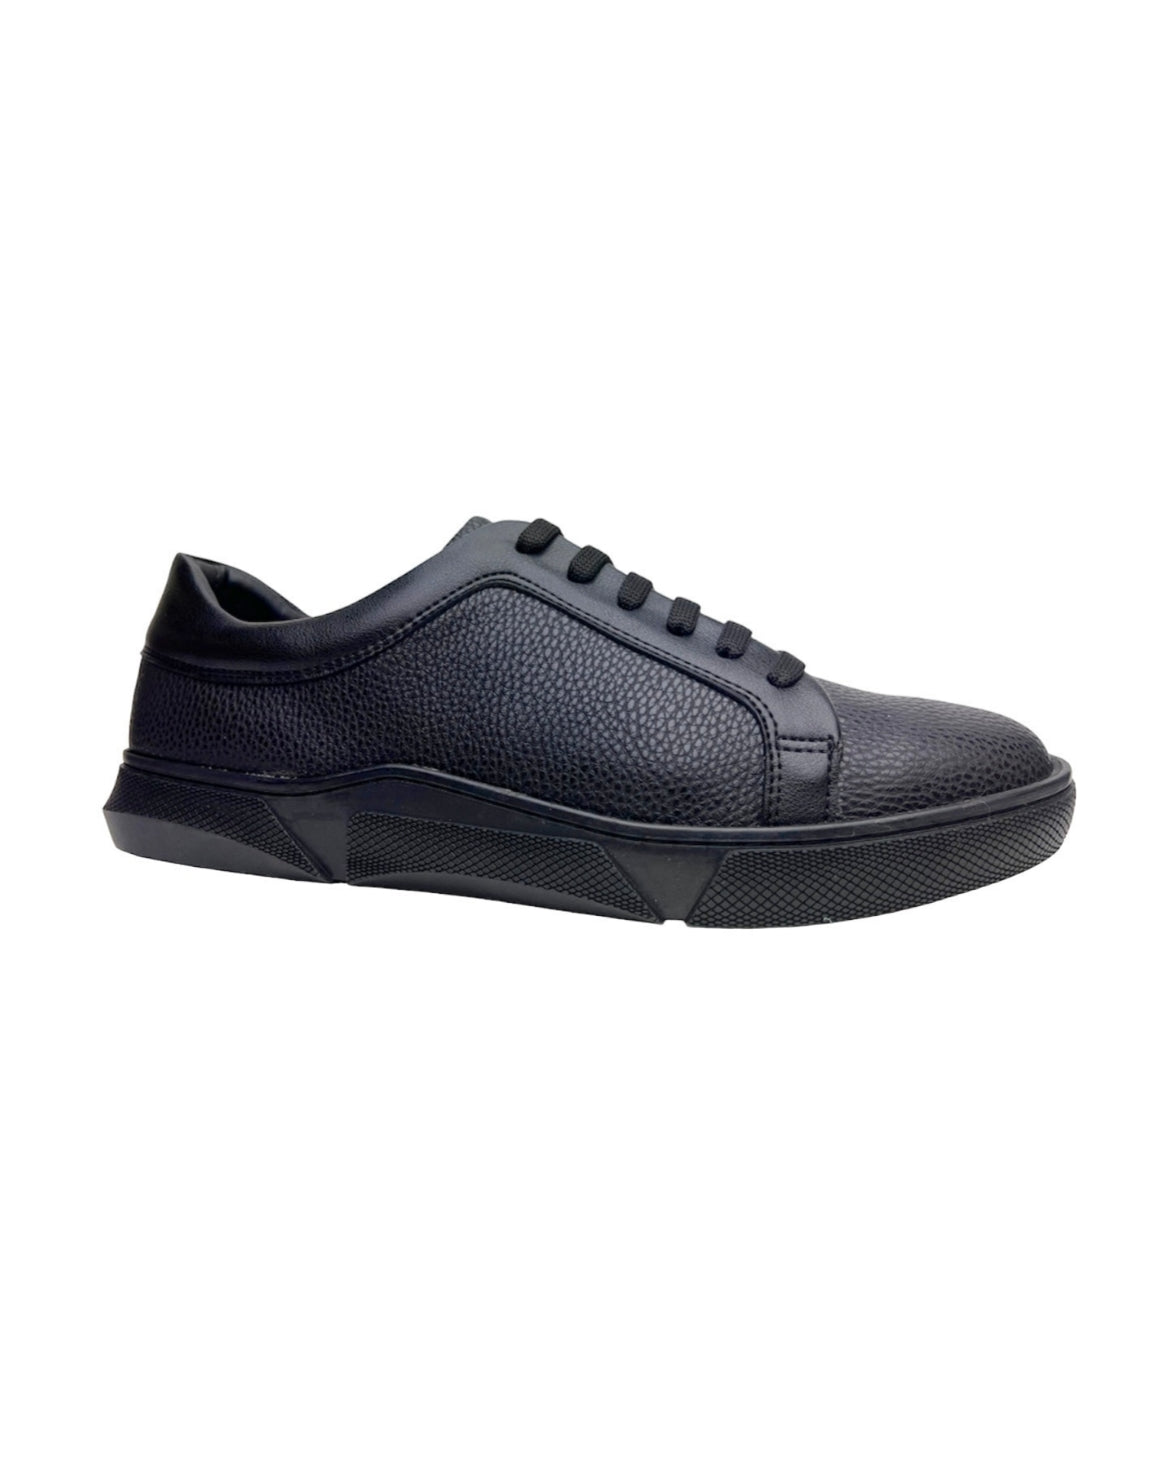 SALE! 2H #9500 Full Black Casual Shoes